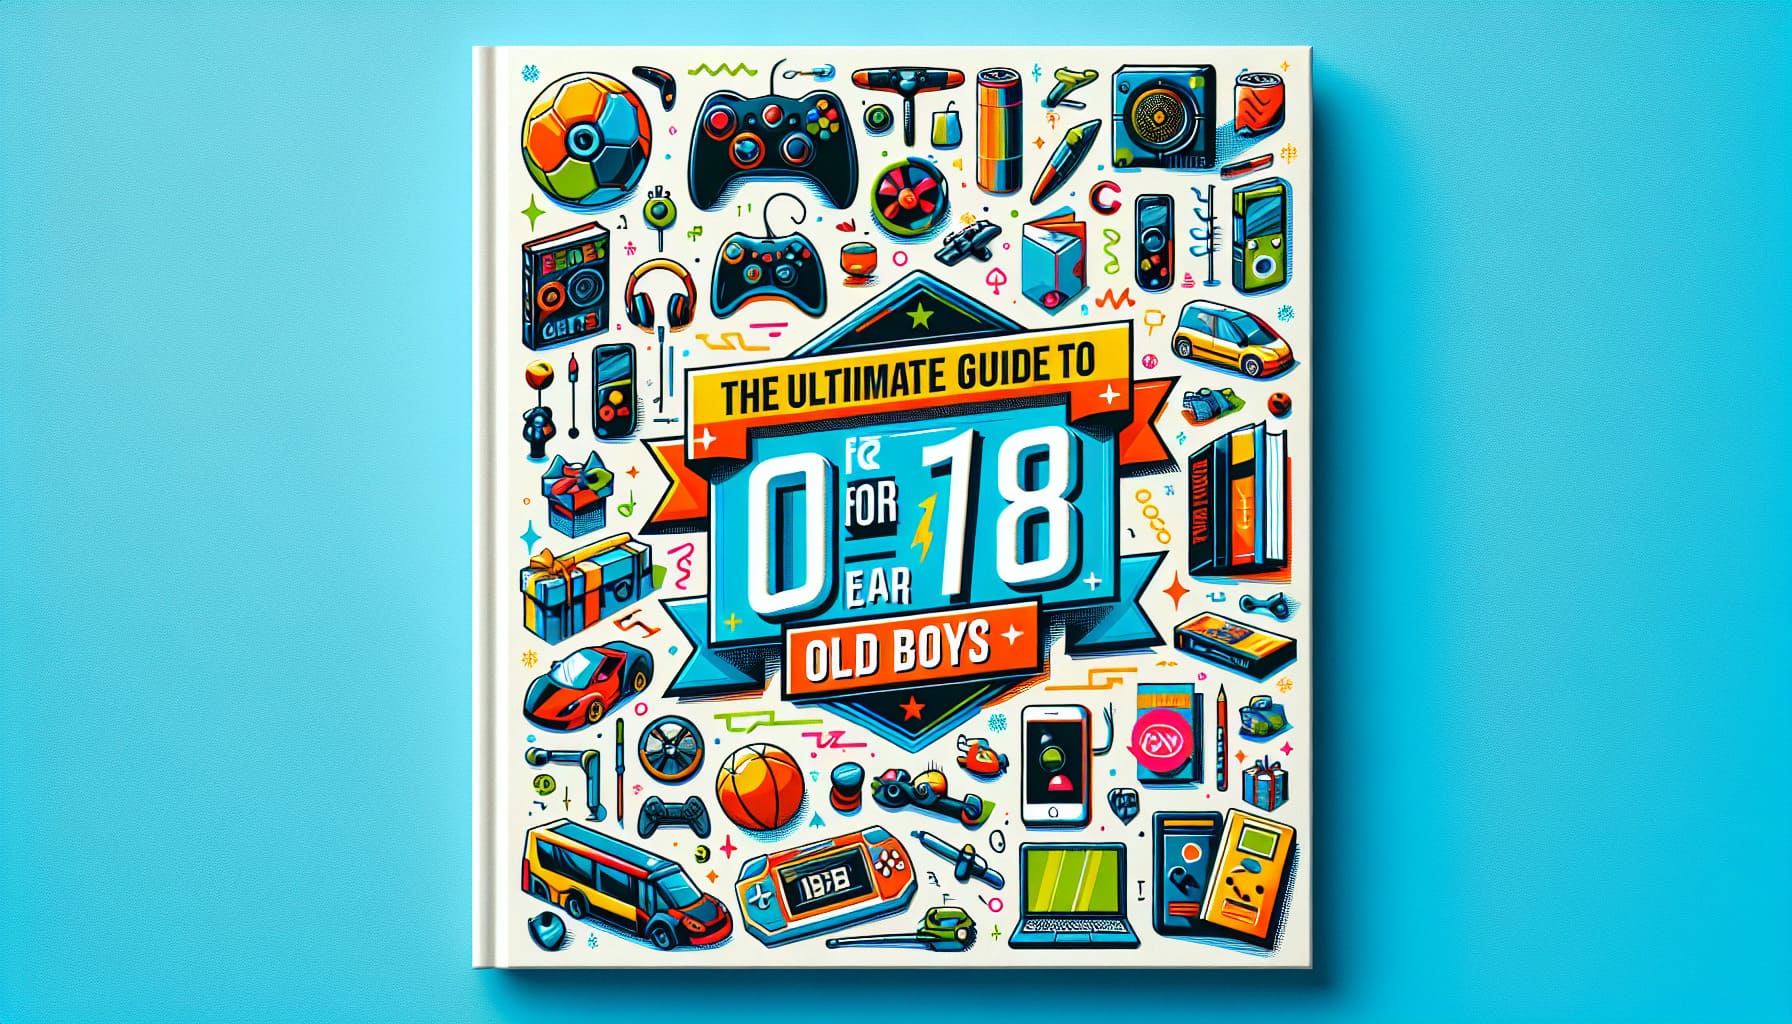 The Ultimate Guide to Gifts for 18 Year Old Boys